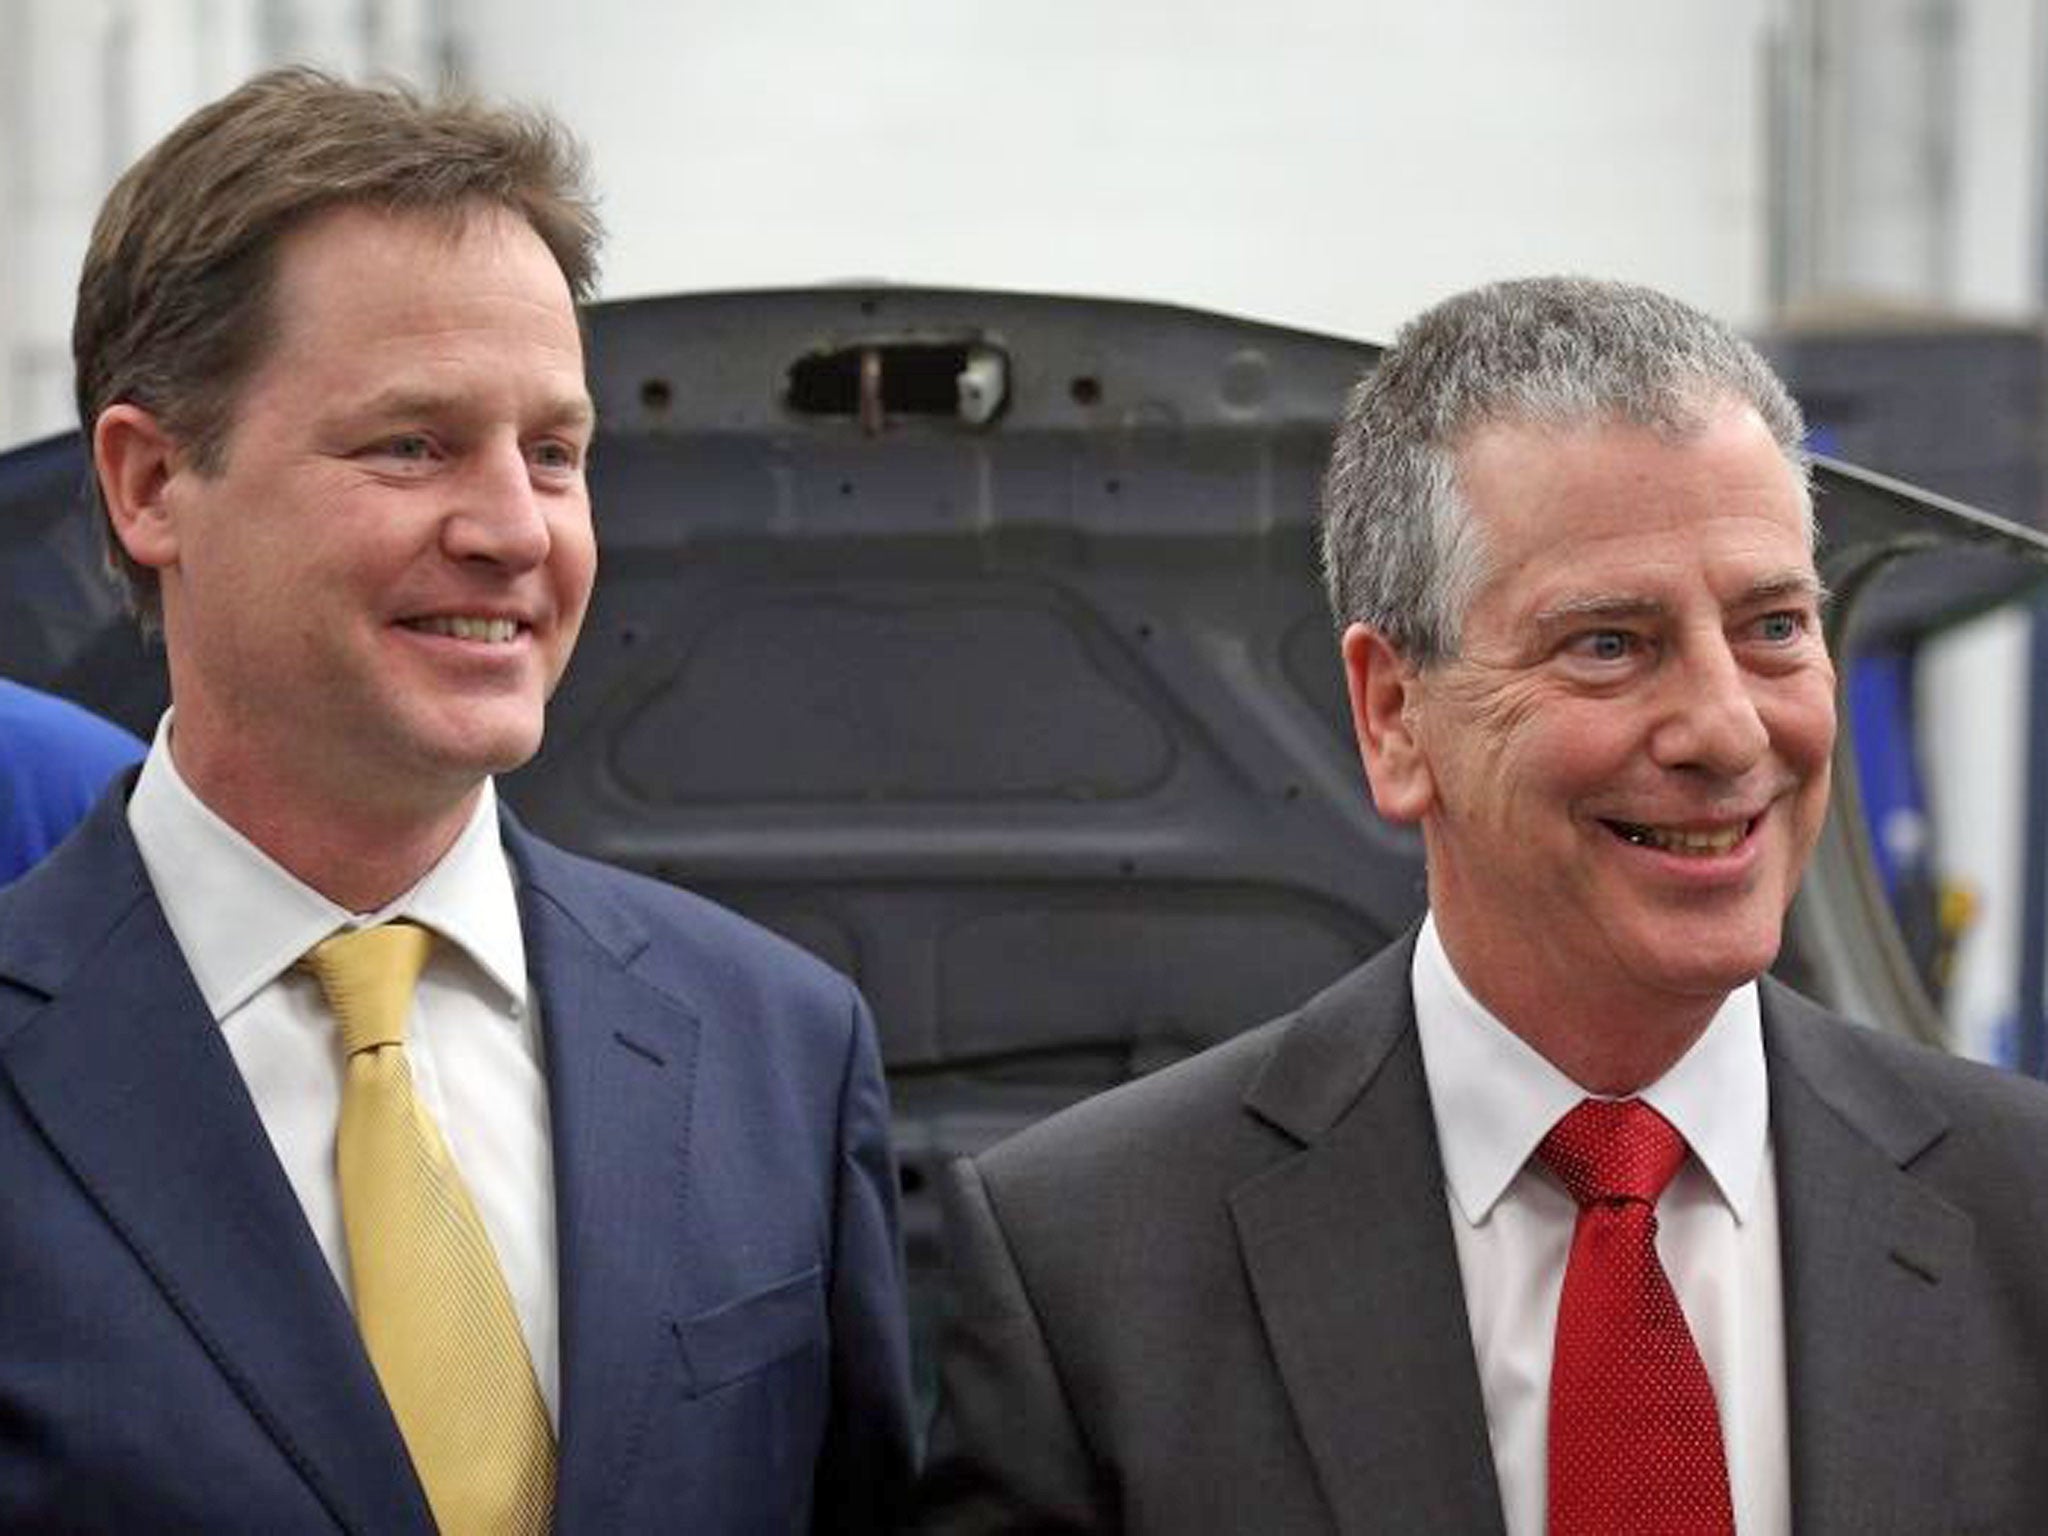 Mike Thornton, with Nick Clegg (left) at automotive studies department of Eastleigh College